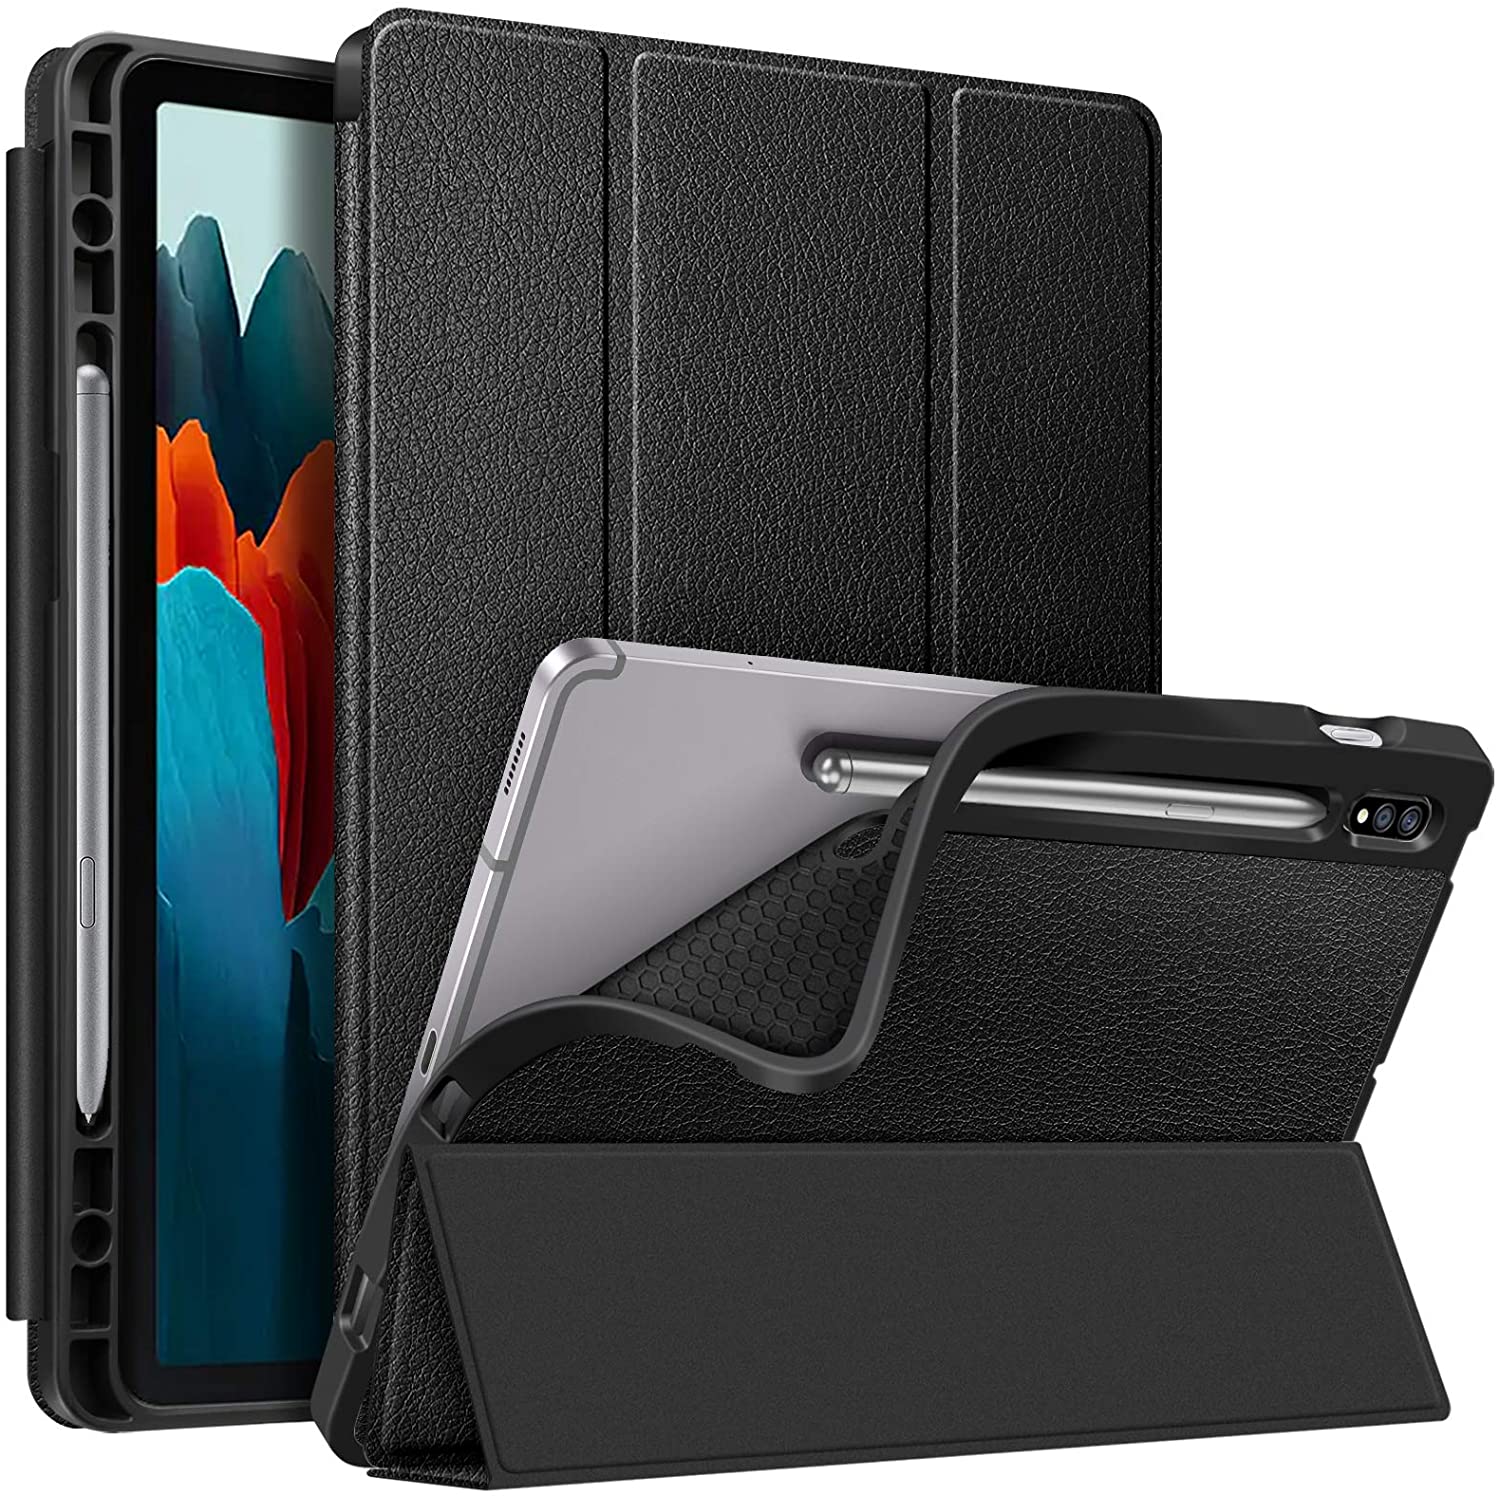 Buy Case for Samsung Galaxy Tab S7+ Plus 12.4” 2020 Model SMT970/T975/T976/T978 with Builtin S